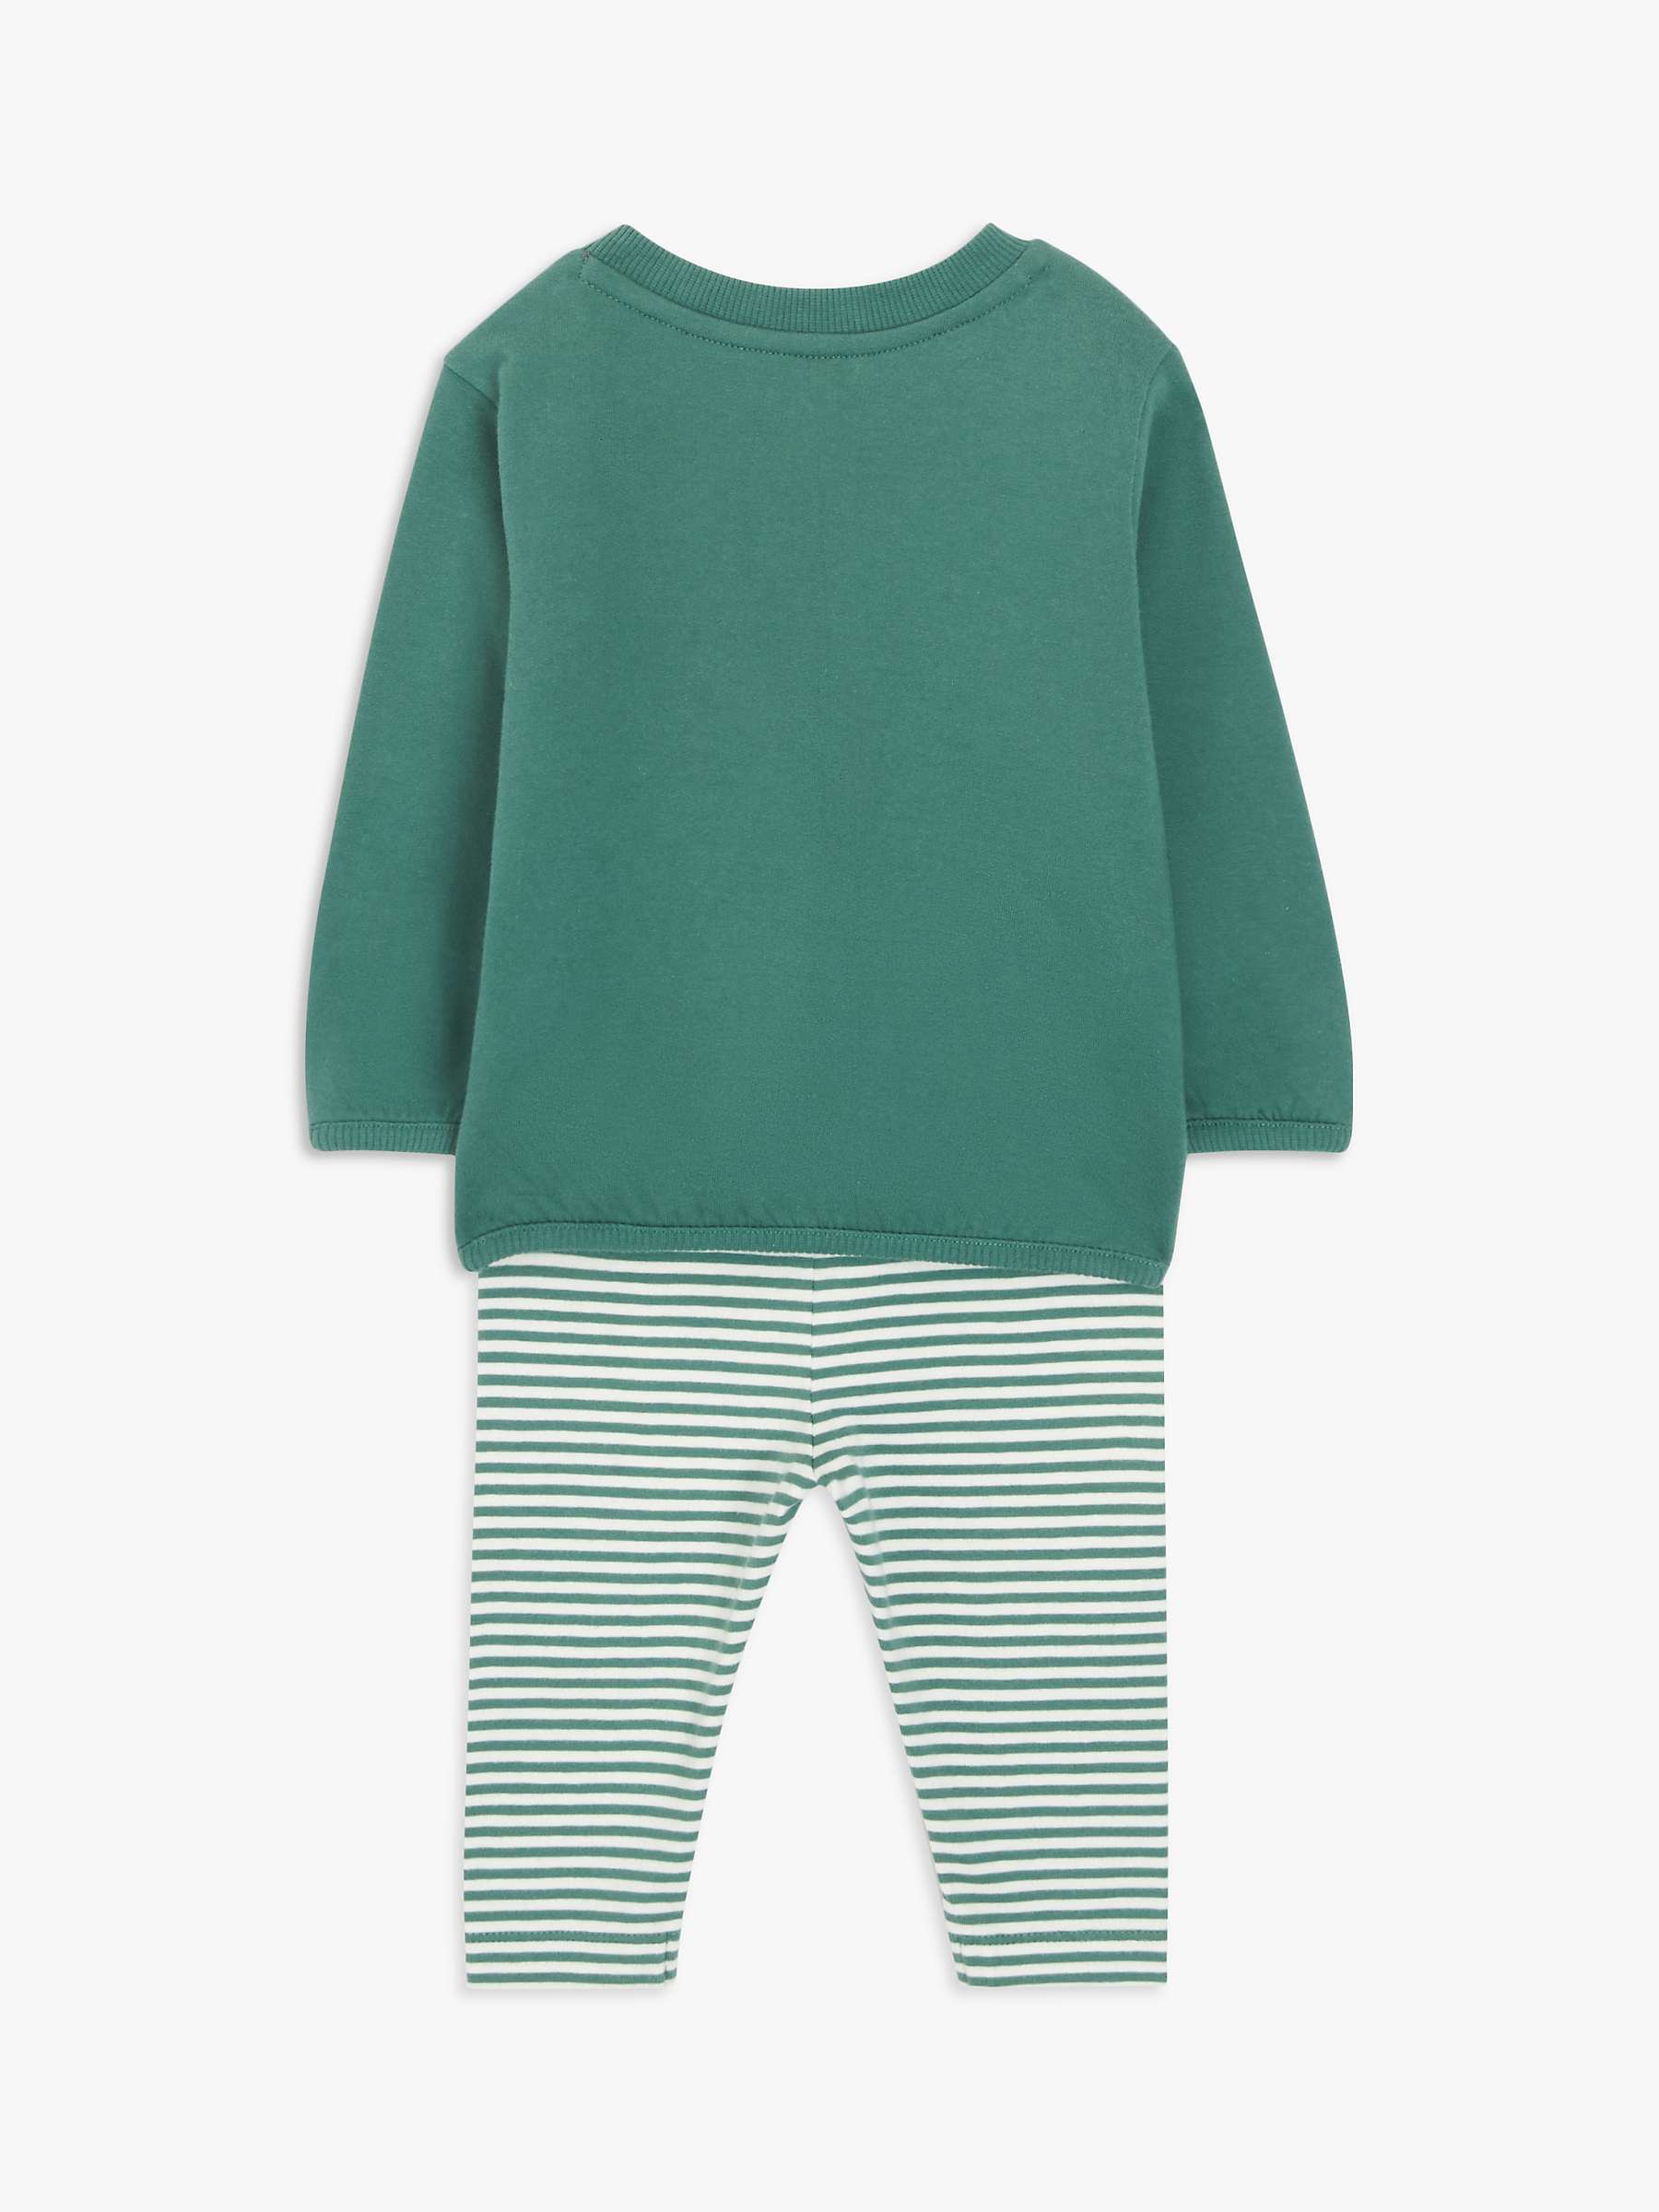 Buy John Lewis Baby Christmas Elf Outfit, Green Online at johnlewis.com